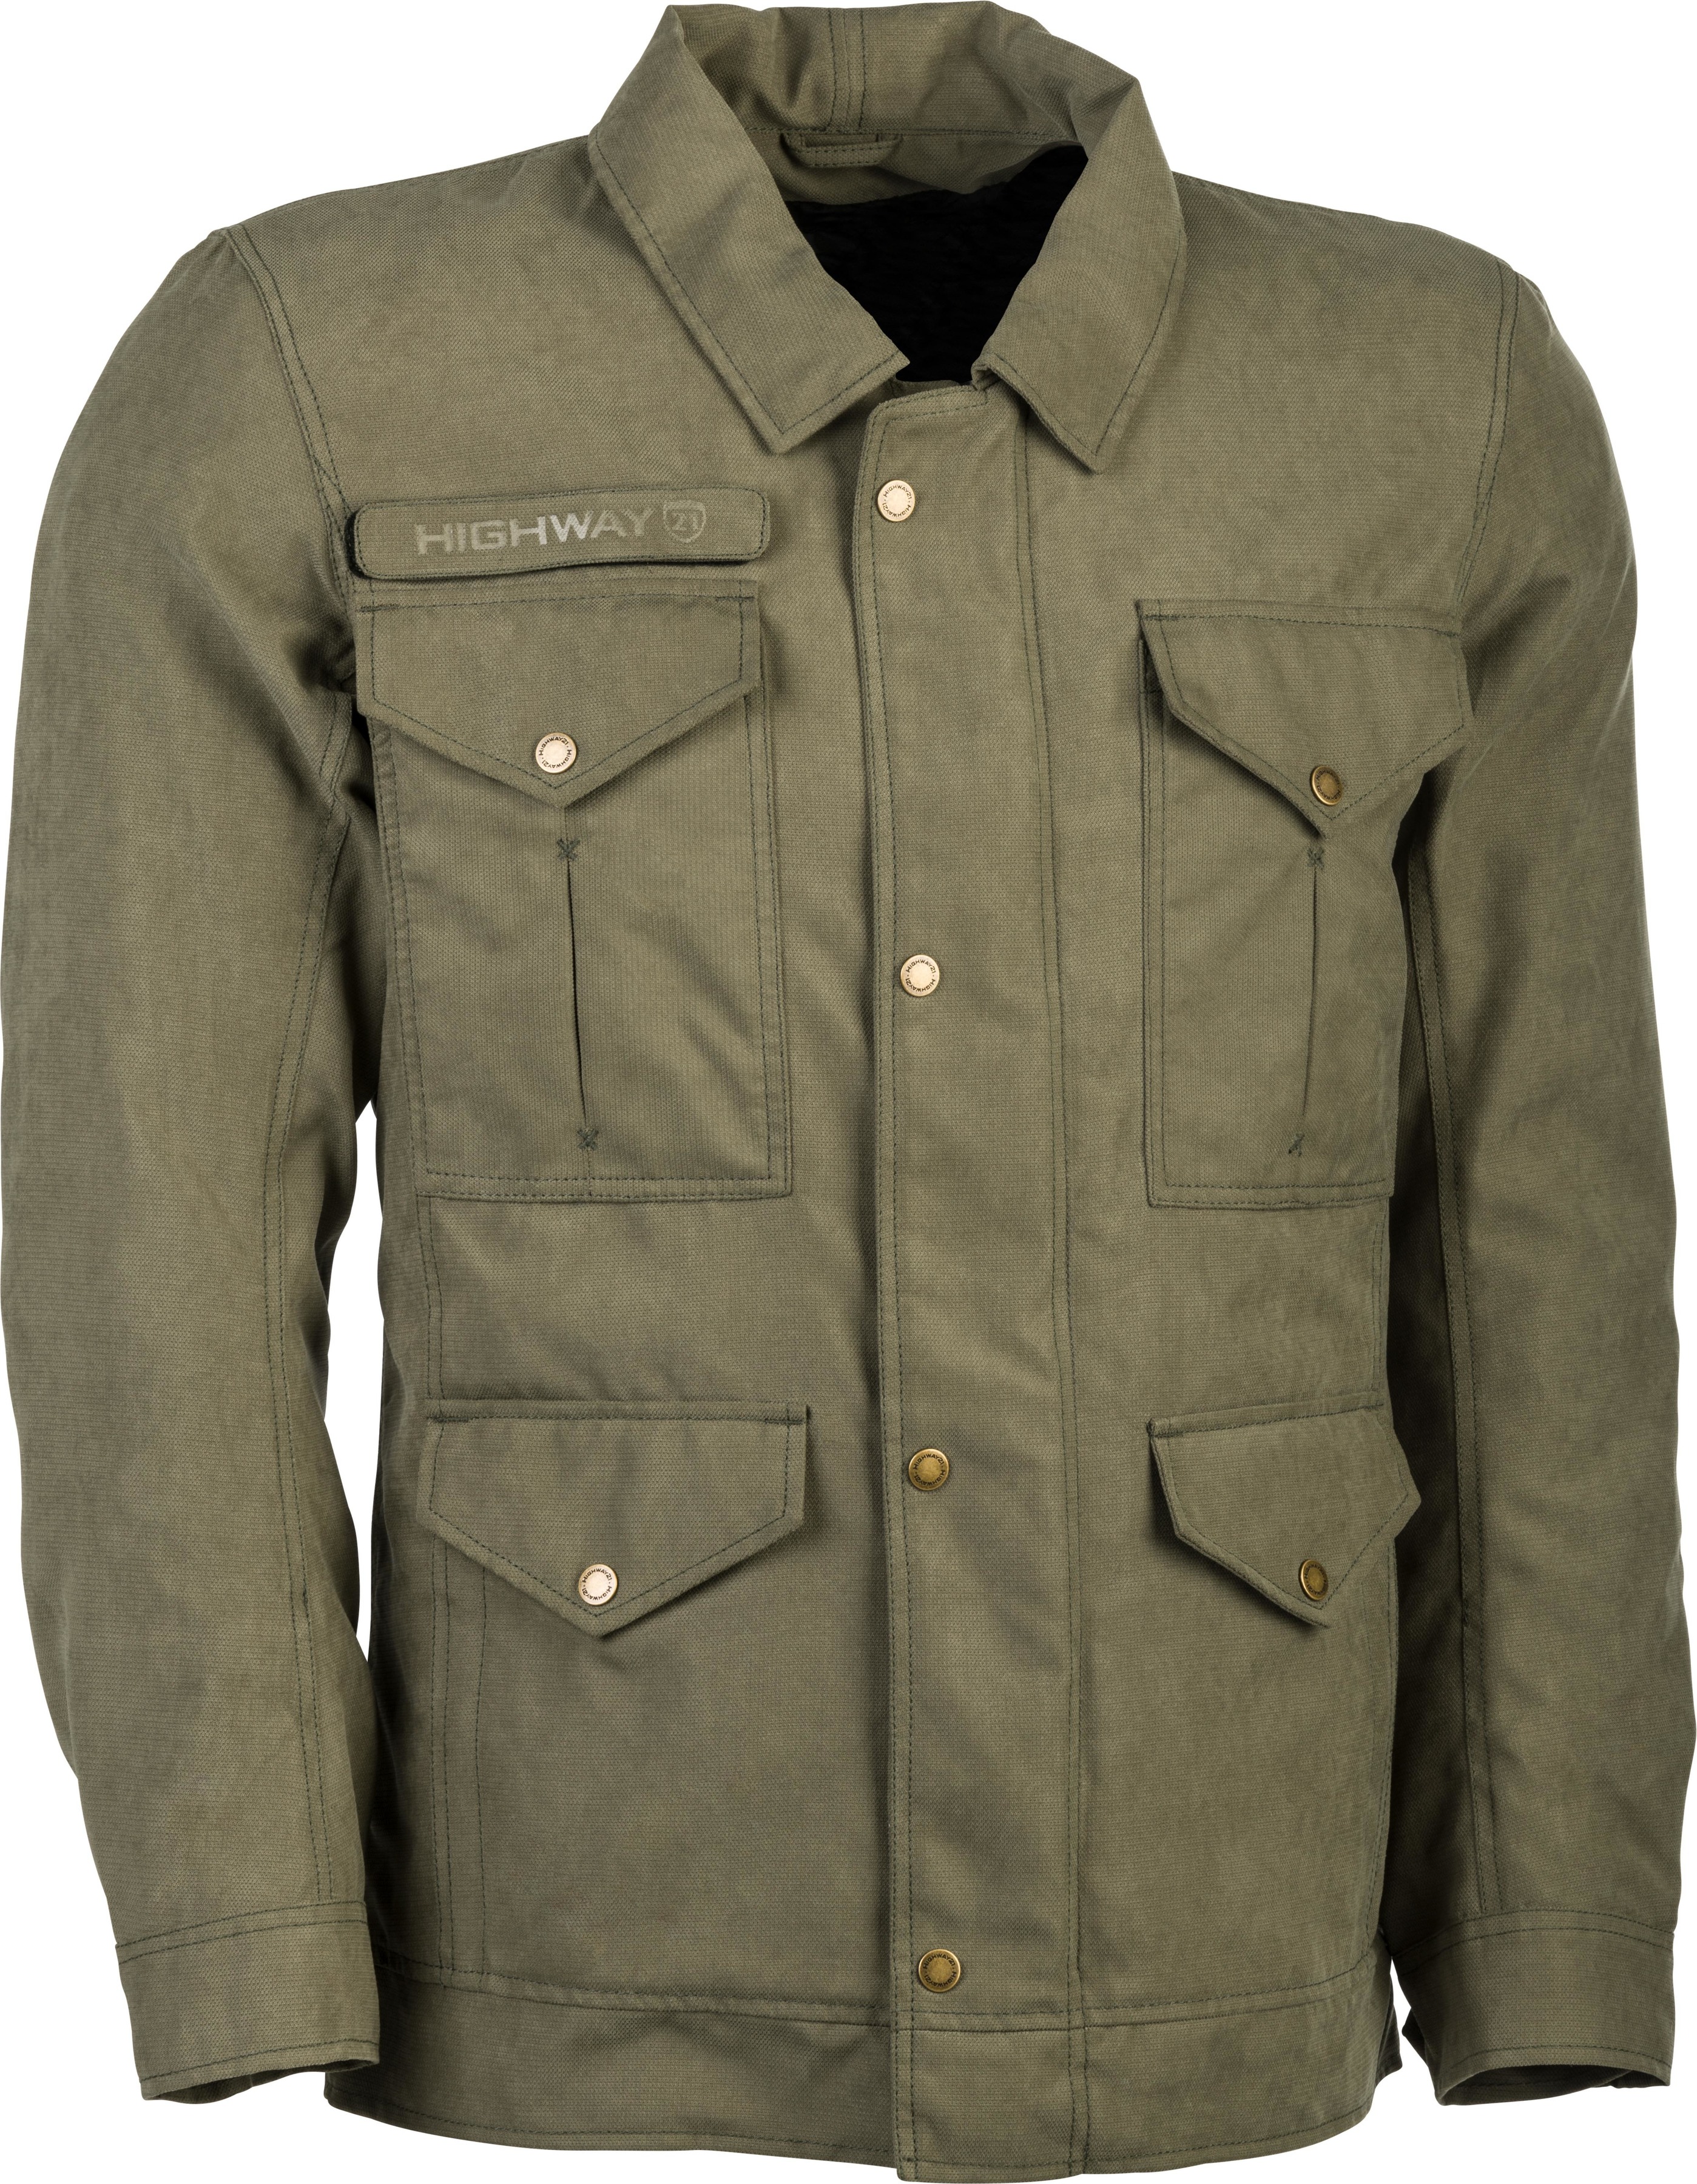 Winchester Riding Jacket Green Small - Click Image to Close